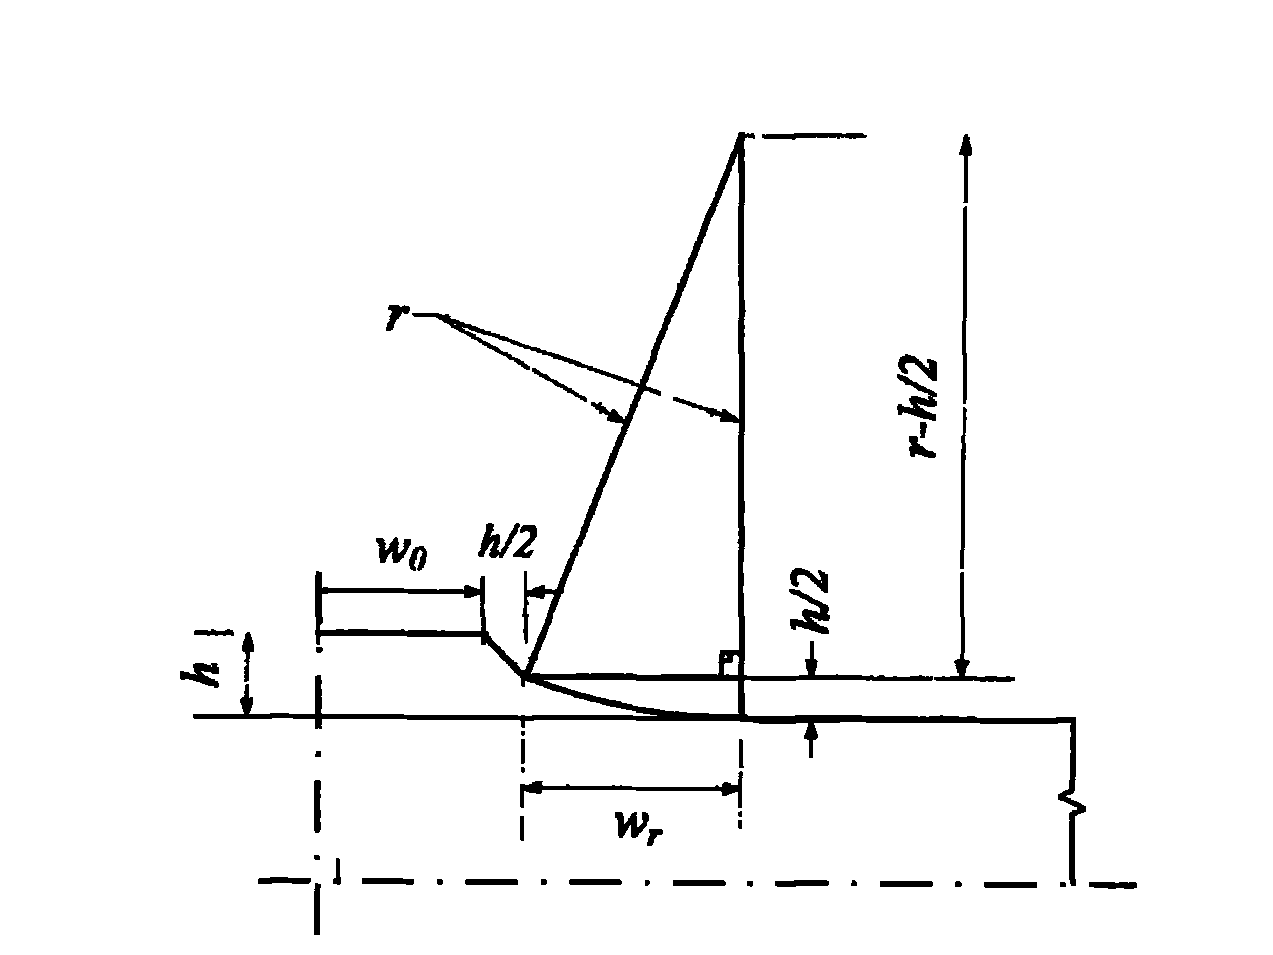 Weld shape design method capable of ensuring undermatching butt joint to bear load in light of strength of parent materials